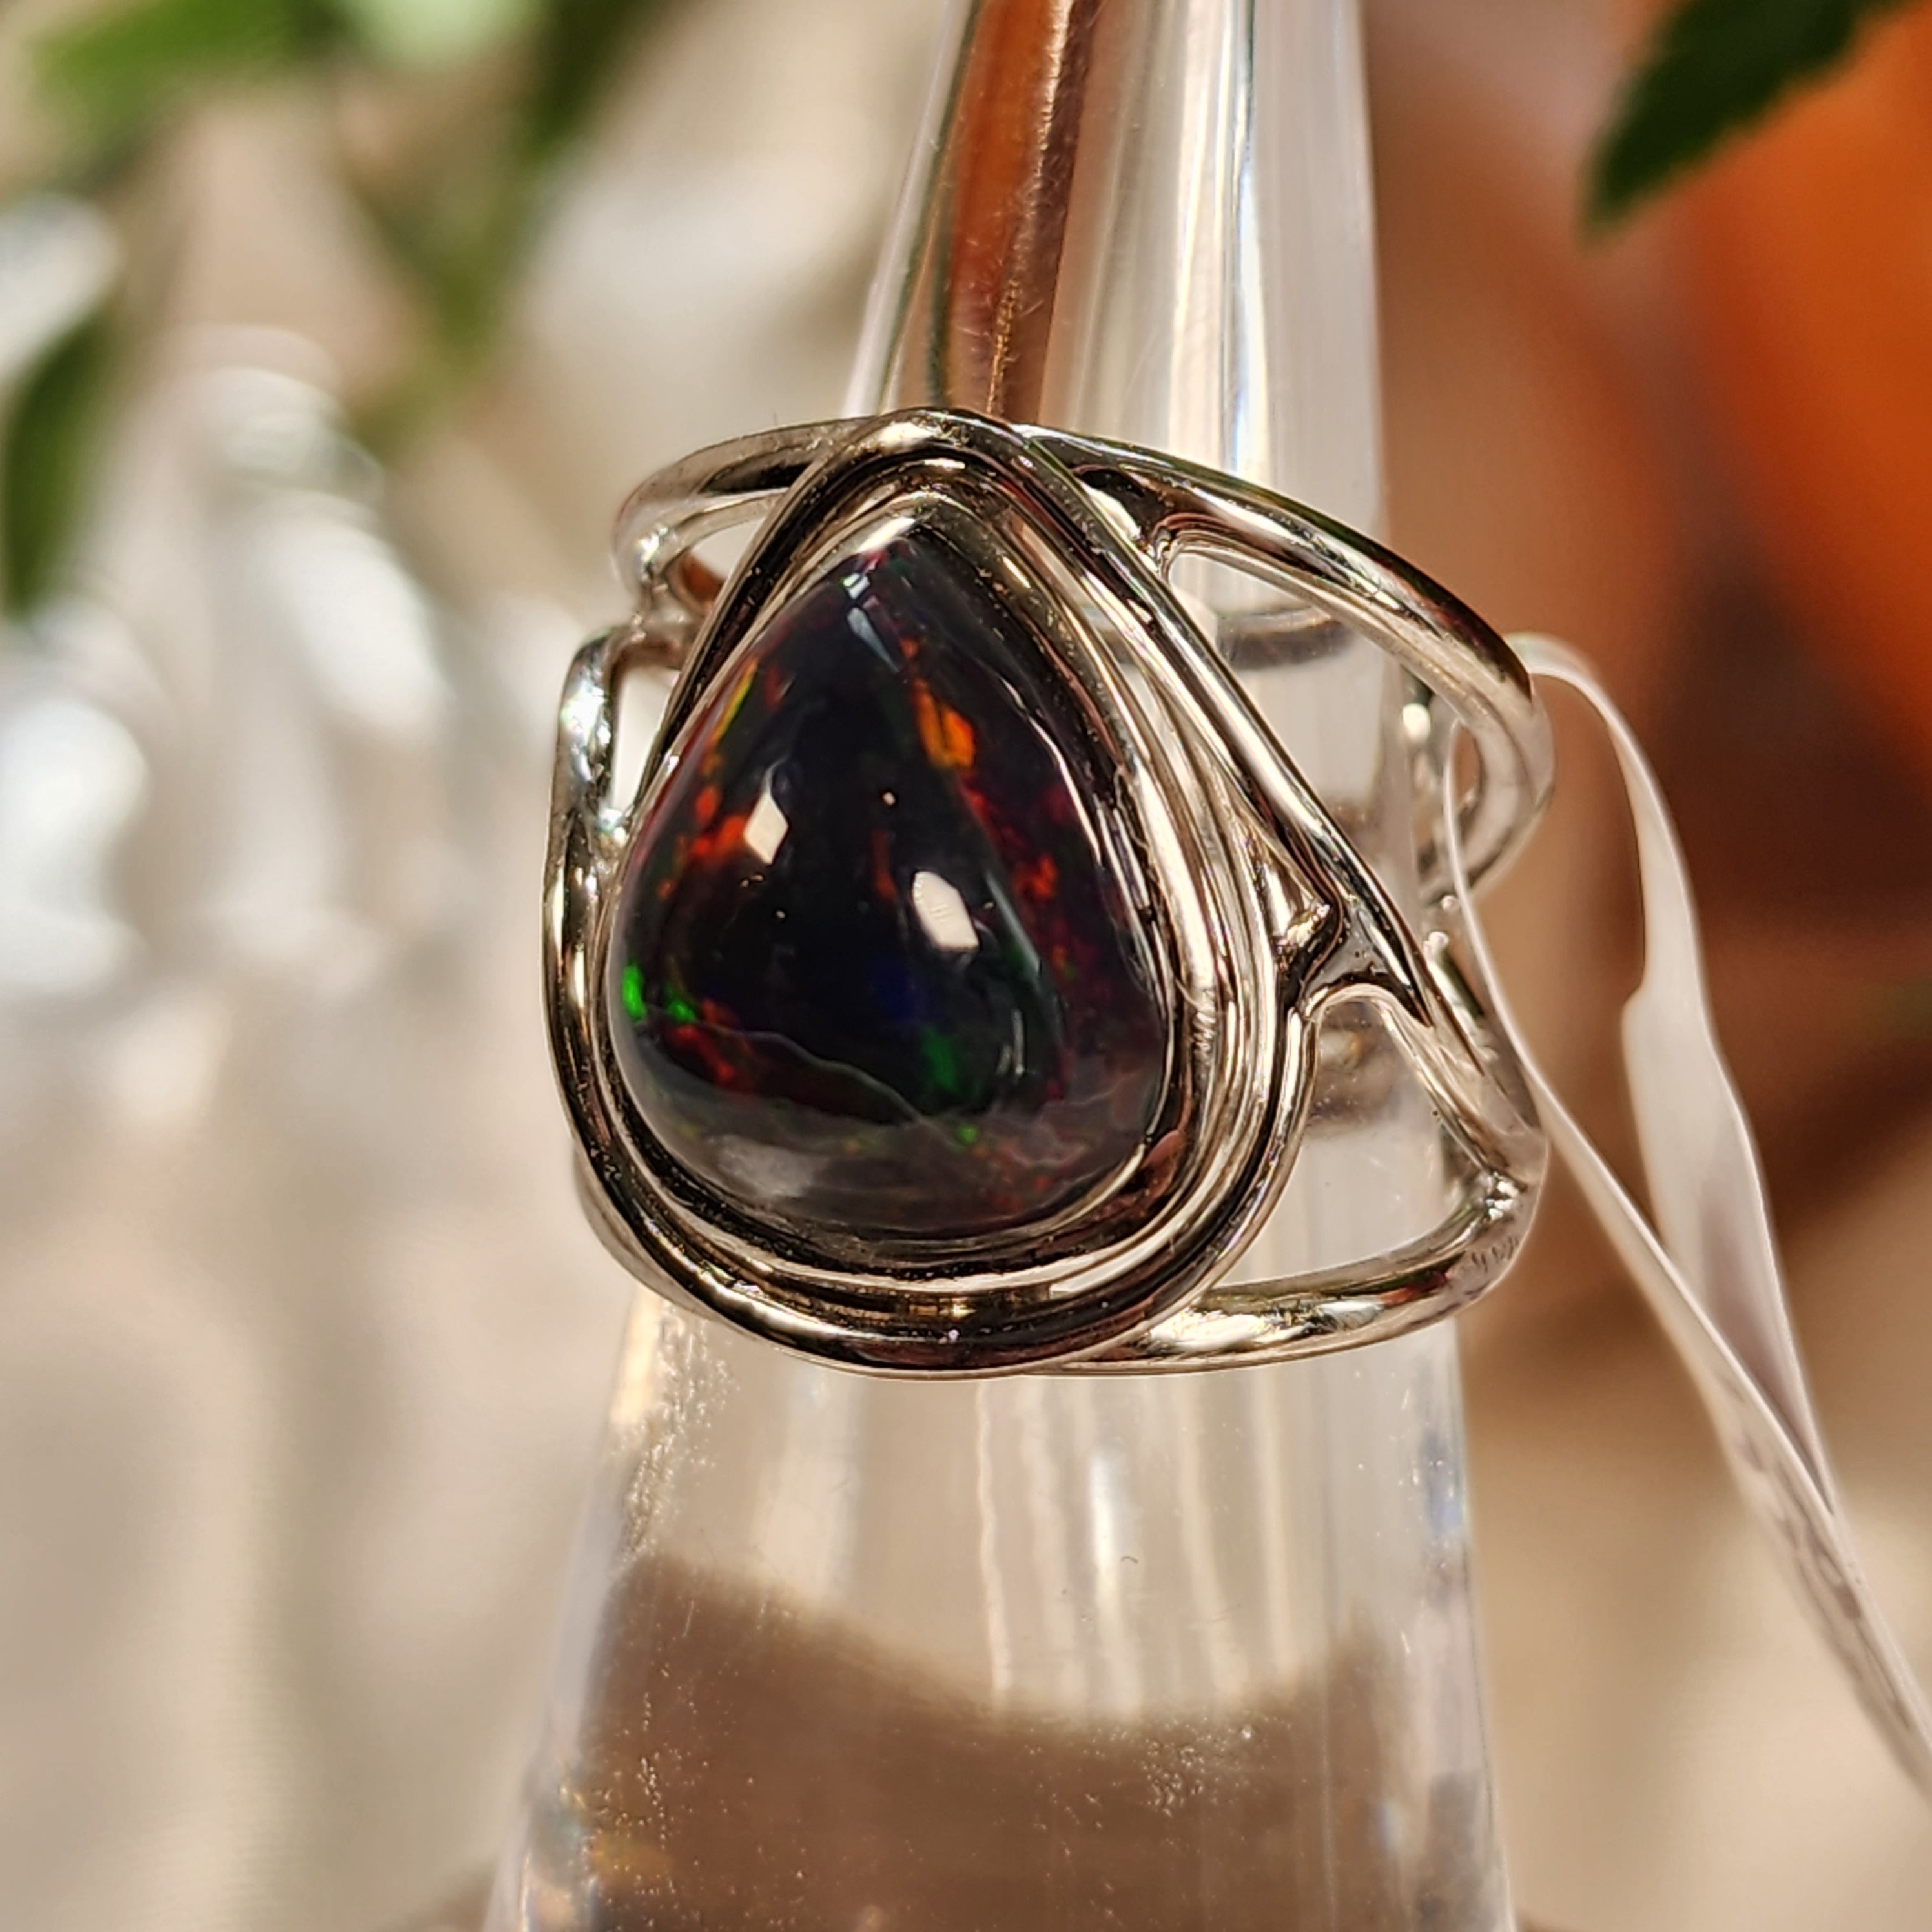 Black Precious Opal Finger Cuff Adjustable Ring .925 Silver for Good Luck, Protection and Joy